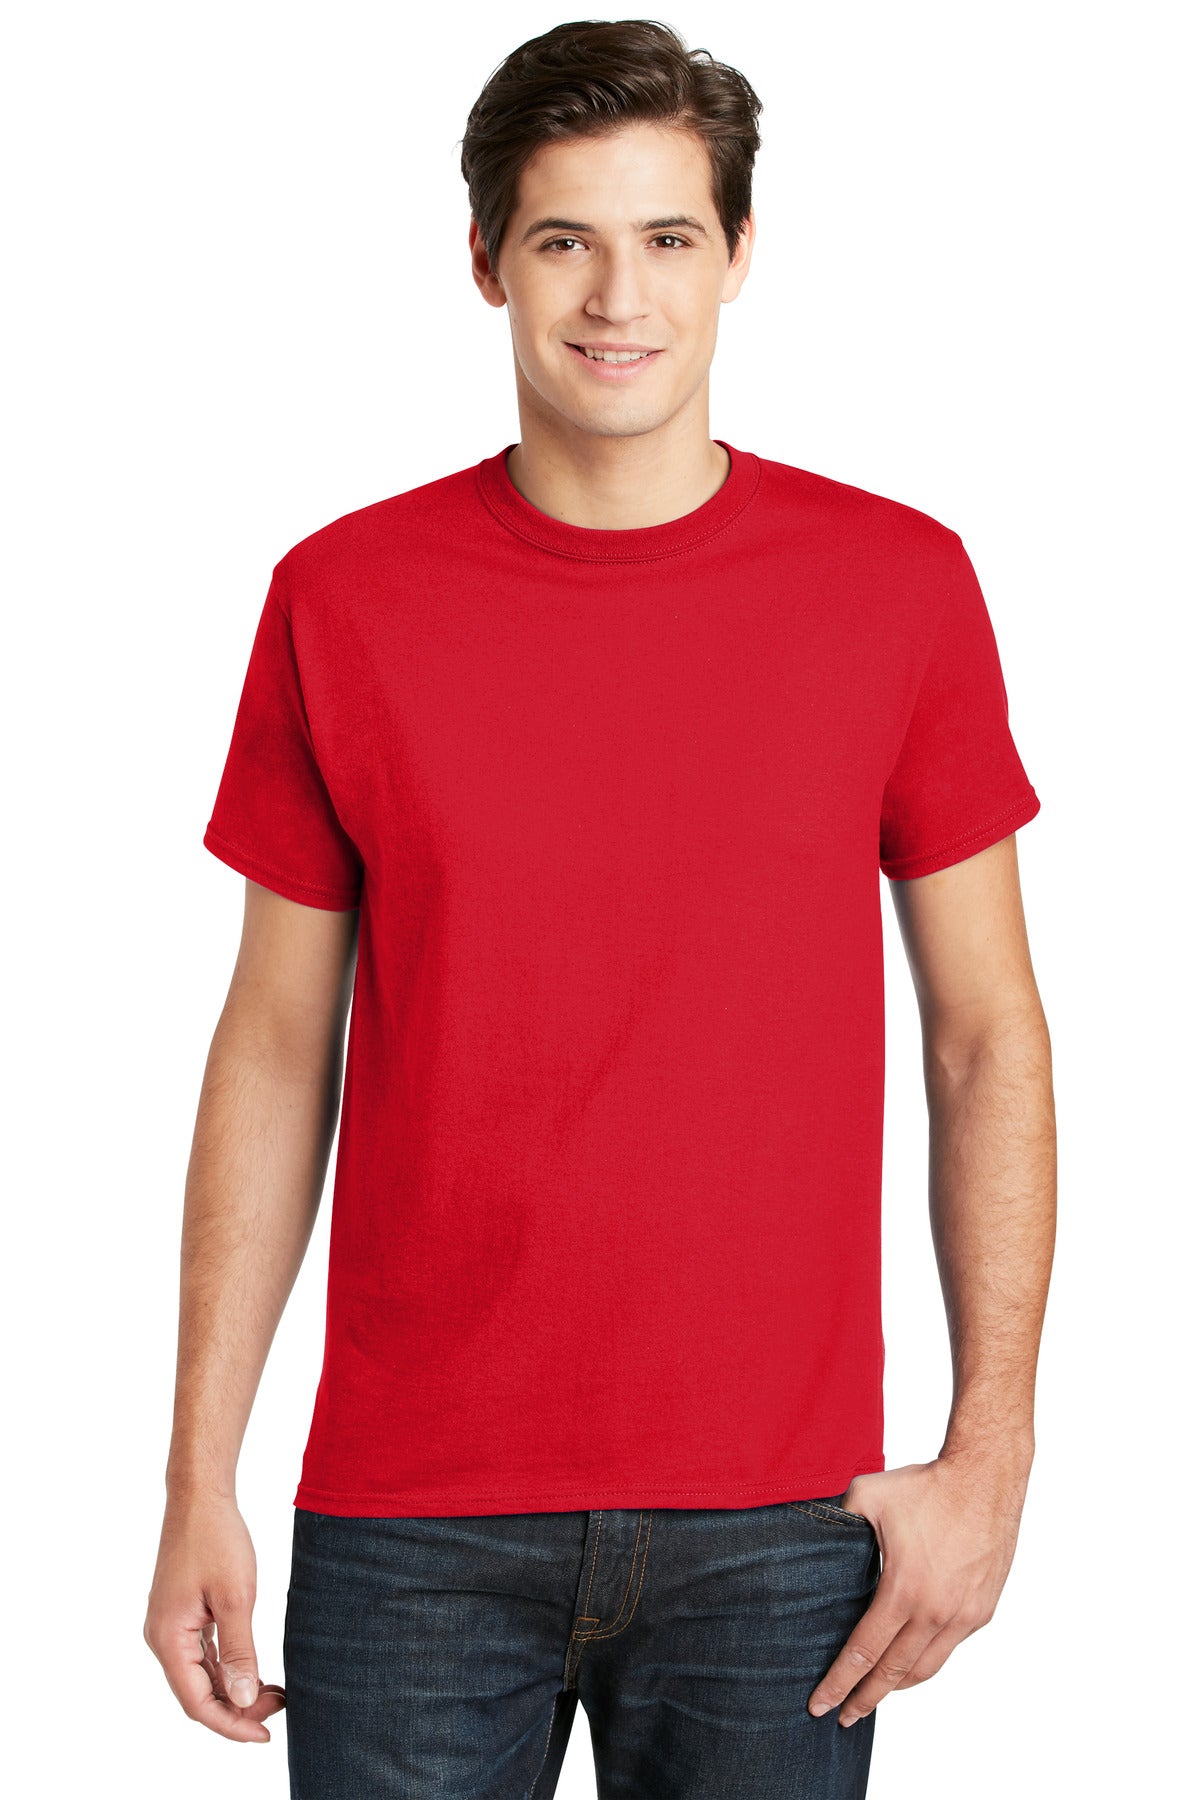 T-Shirts Athletic Red Hanes